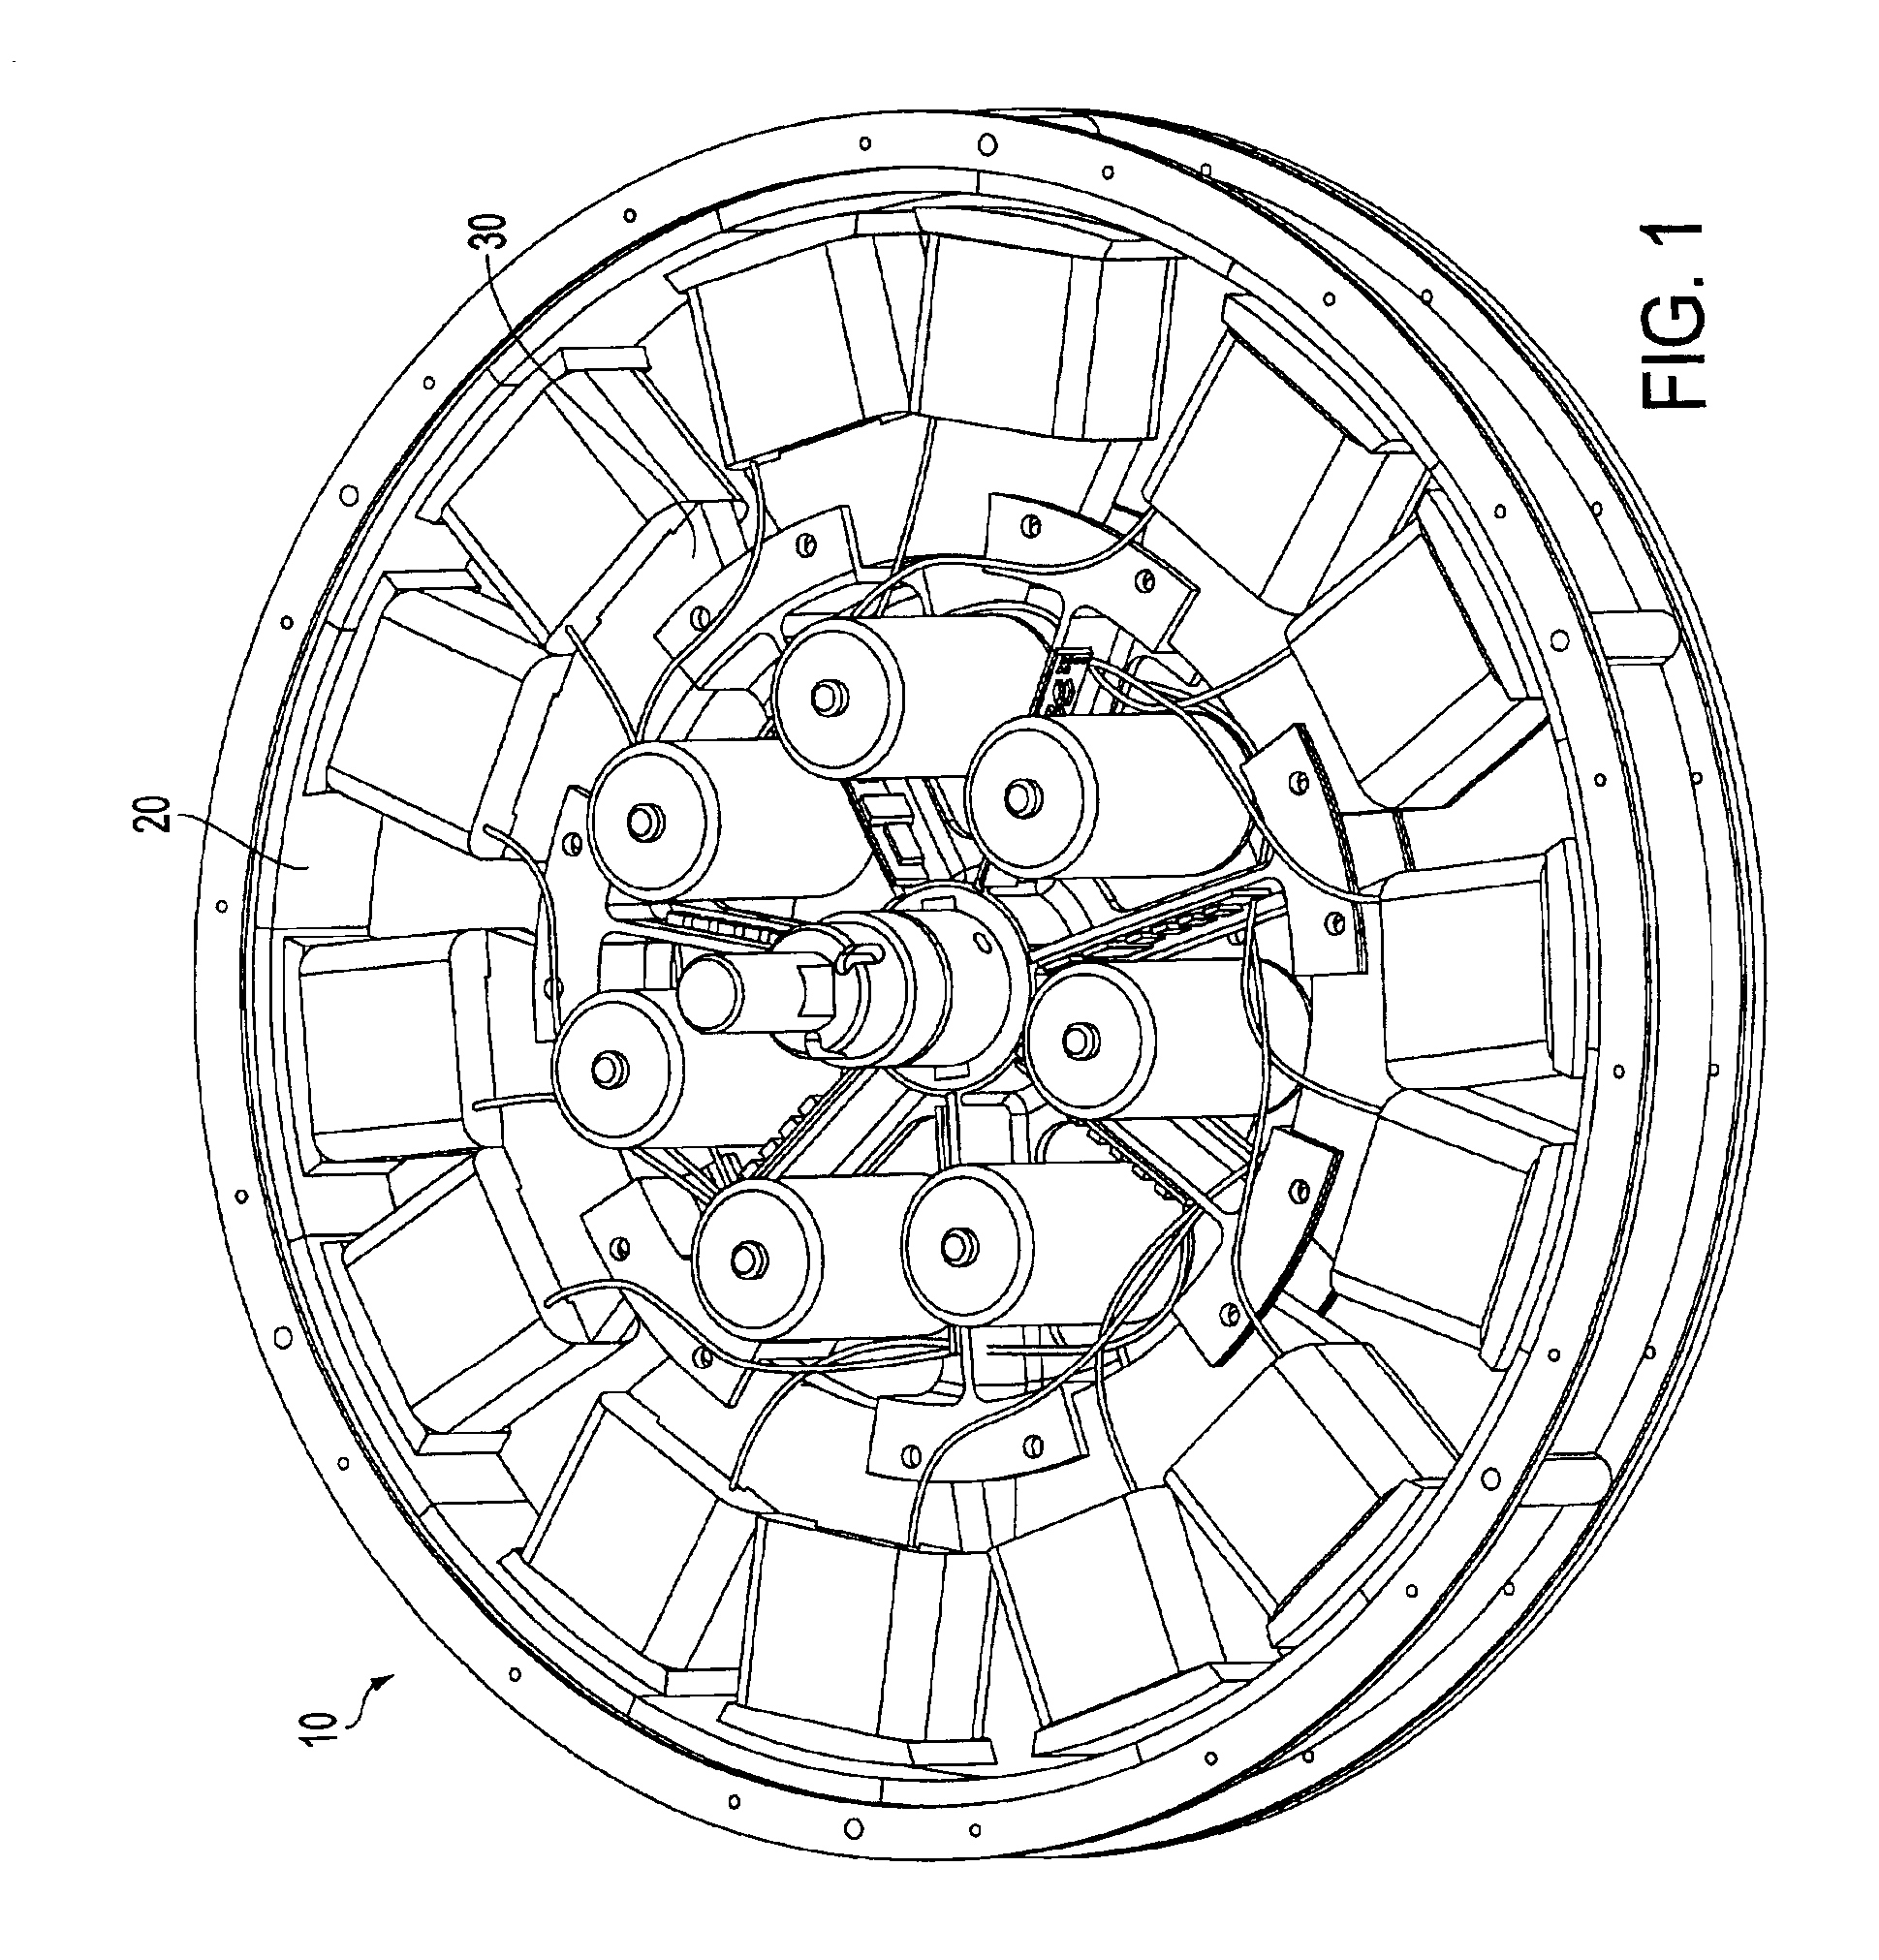 Rotary electric motor having separate control modules for respective stator electromagnets